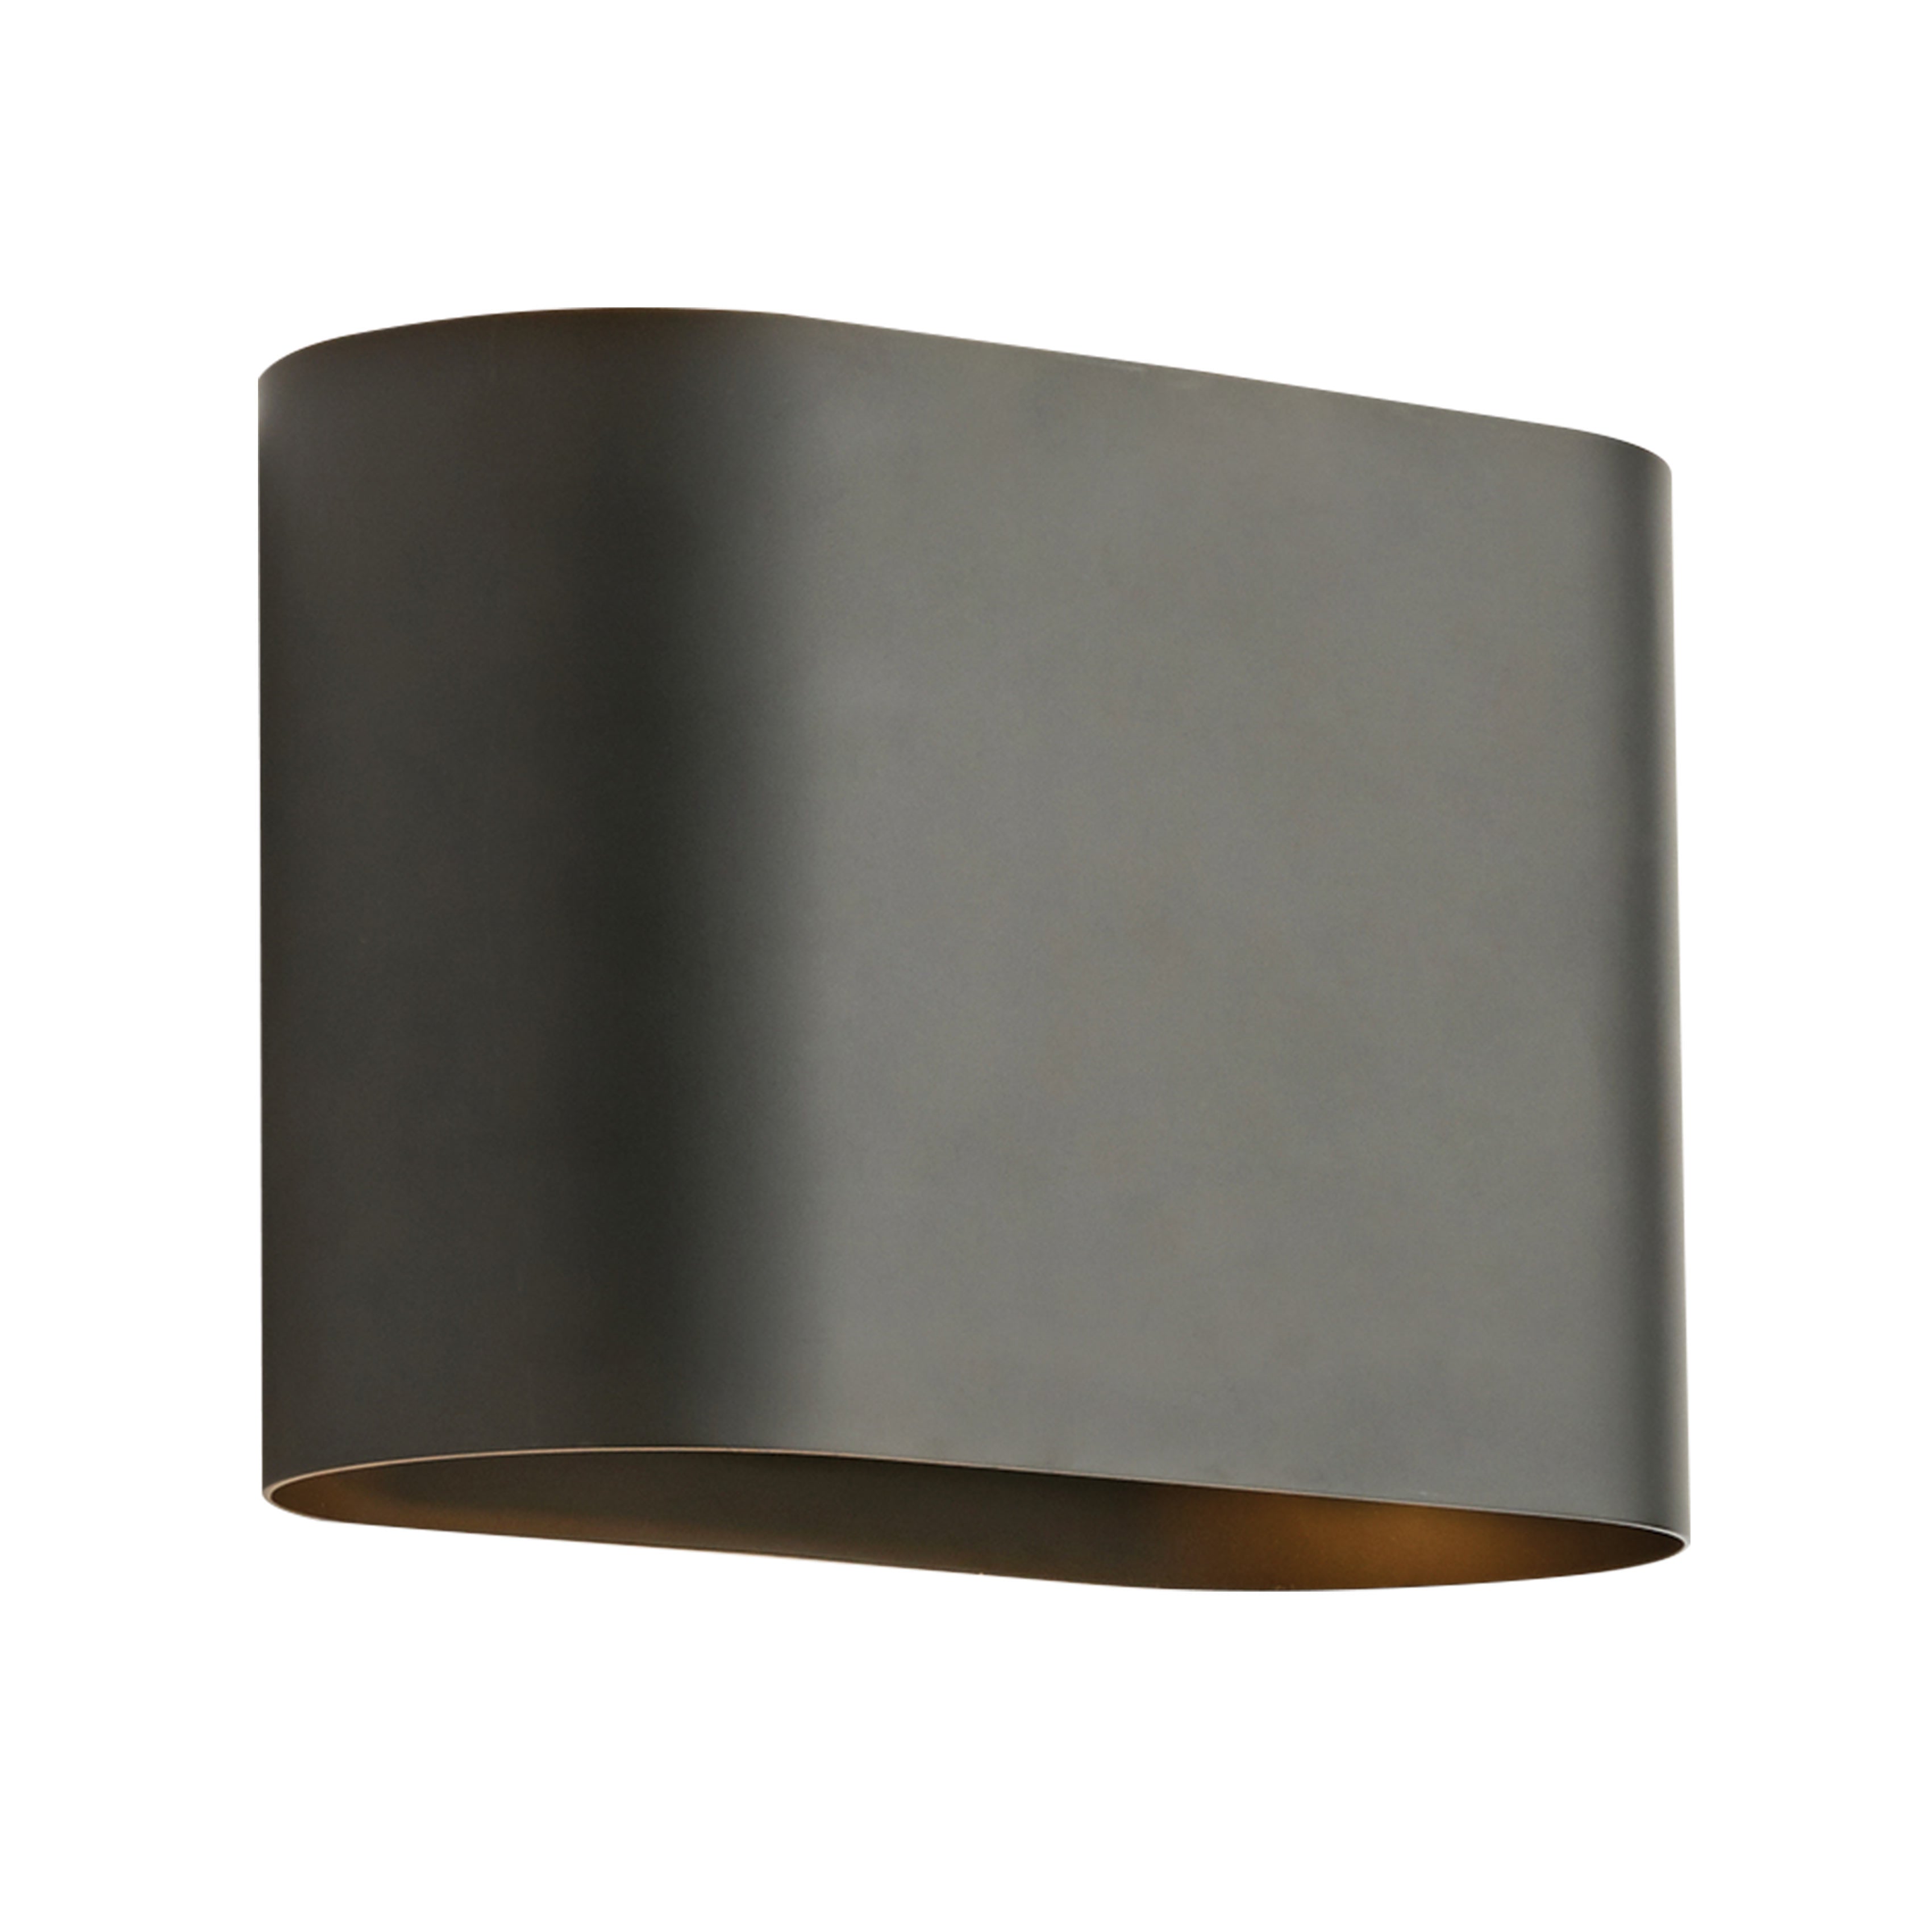 Wall Fixture , Model # SPJ-BWW8 <b><font color="red">NEW!</font></b></p> in